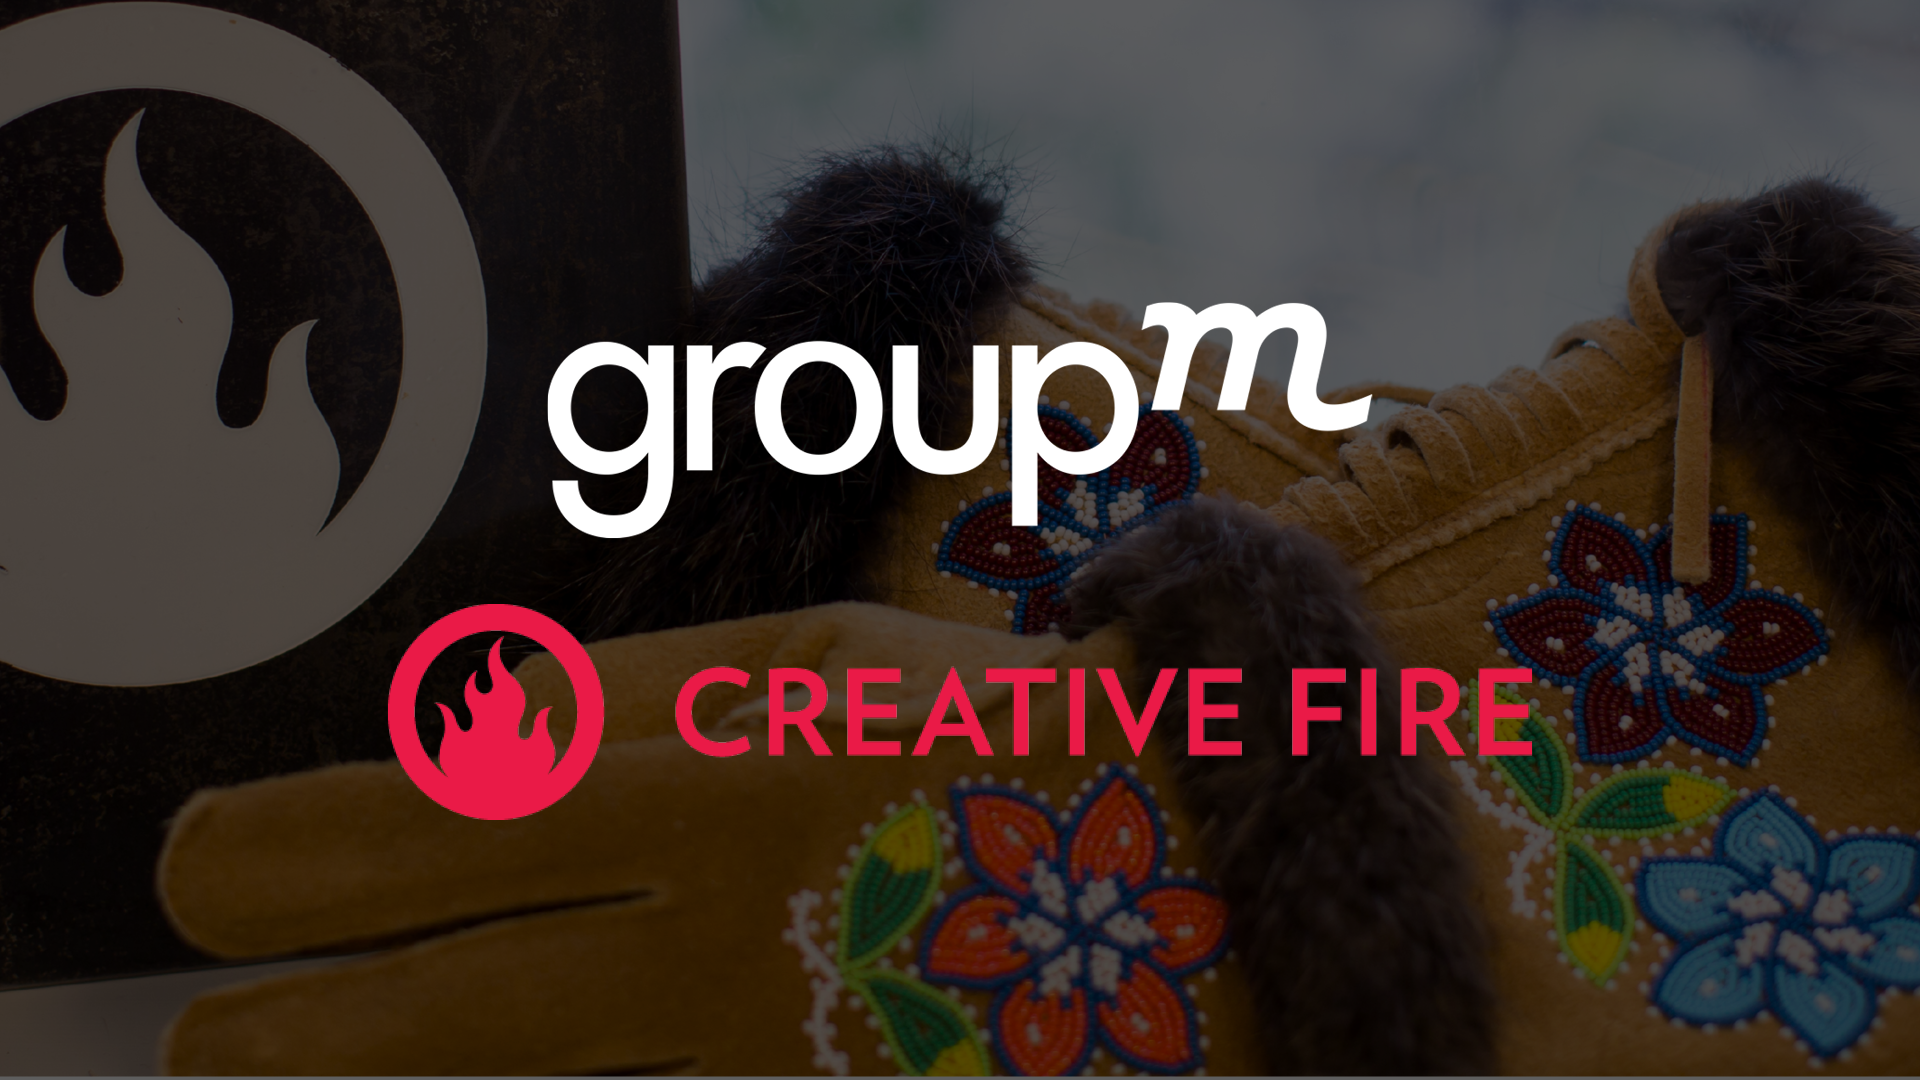 GroupM Canada and Creative Fire partner to enable Indigenous opportunities and advance reconciliation